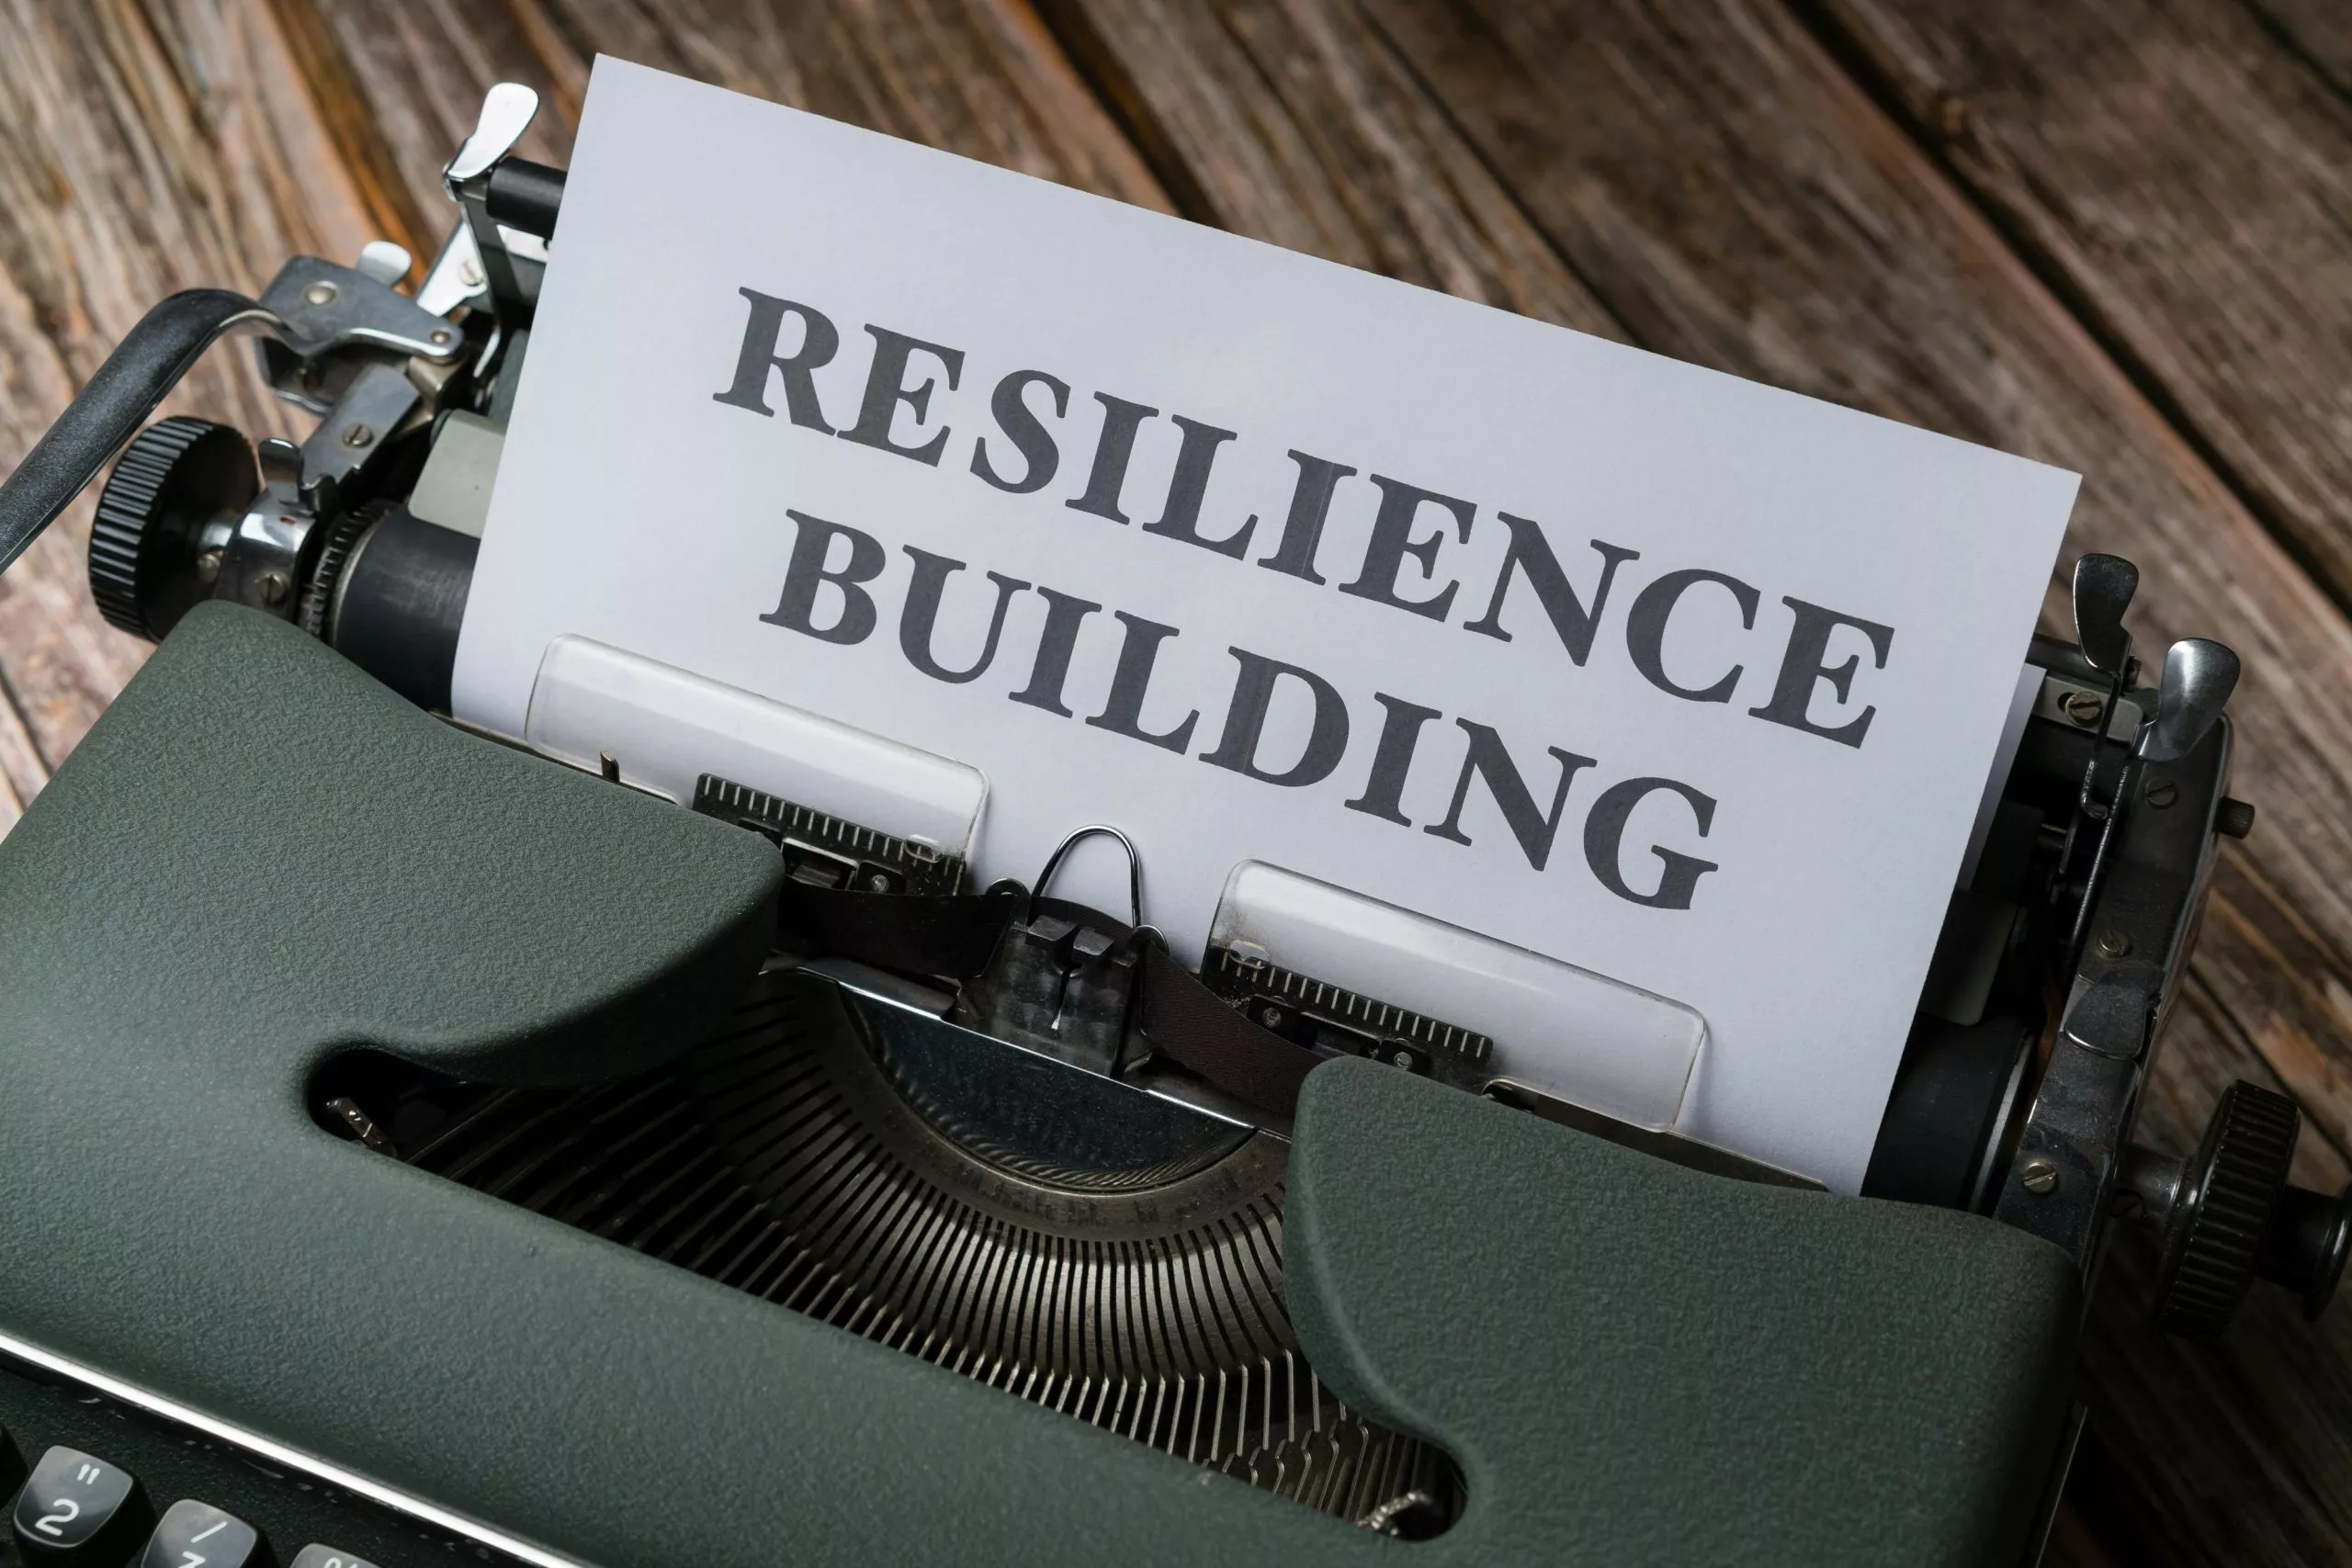 Resilience building image